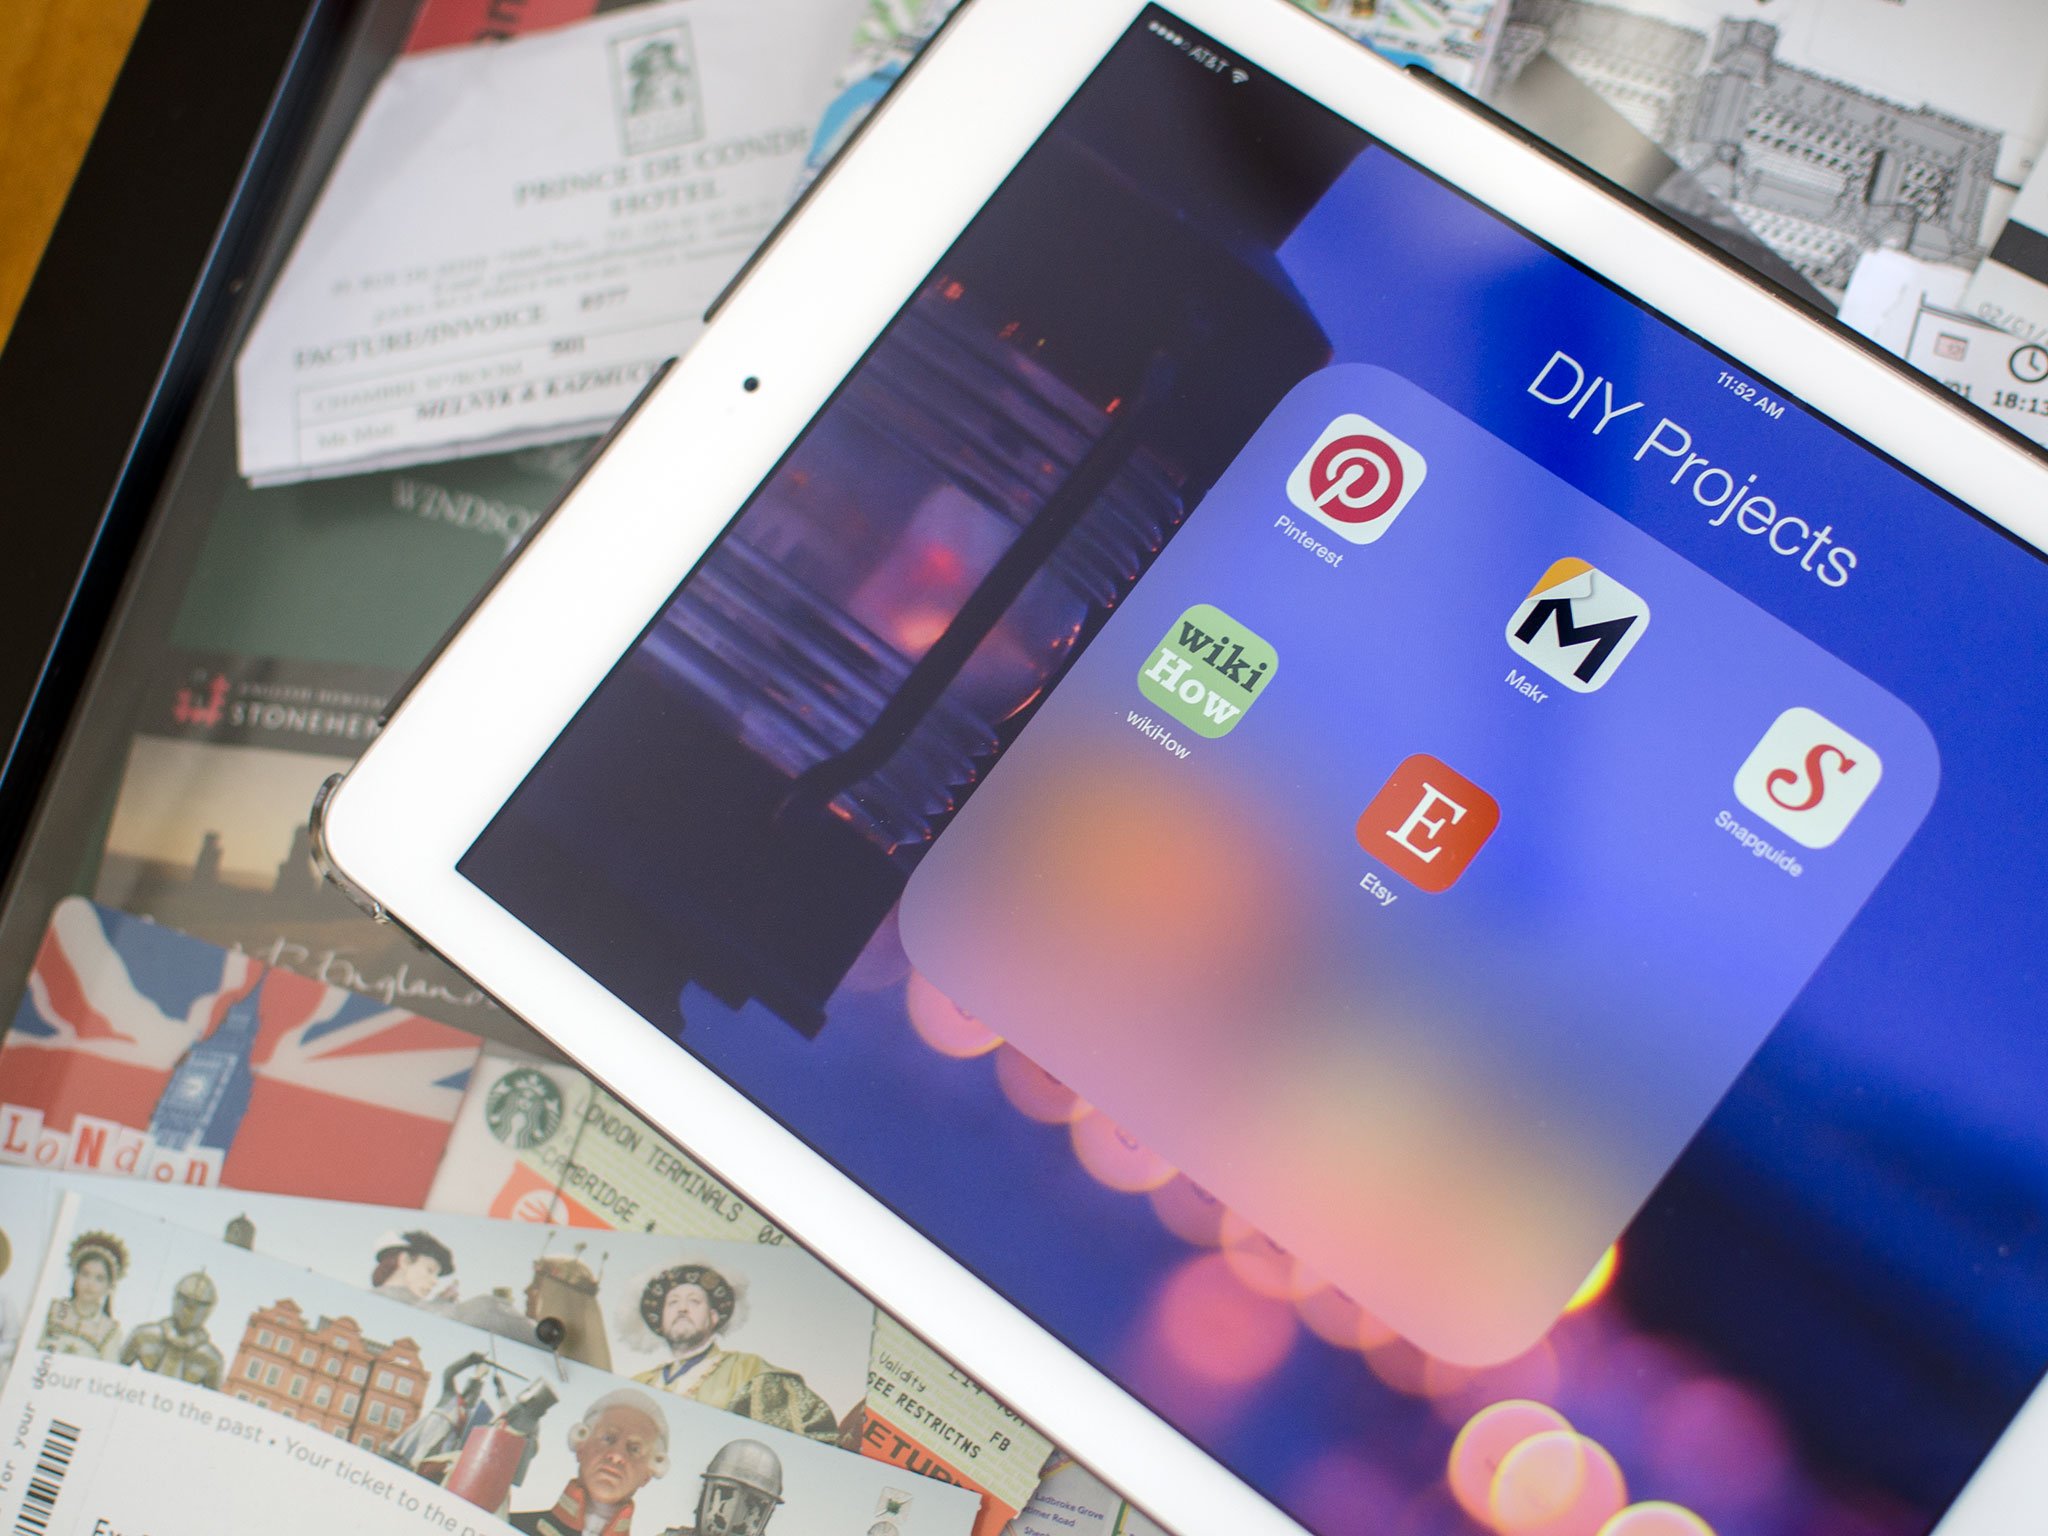 Best DIY and craft apps for iPad: Pinterest, Etsy, Makr, and more!